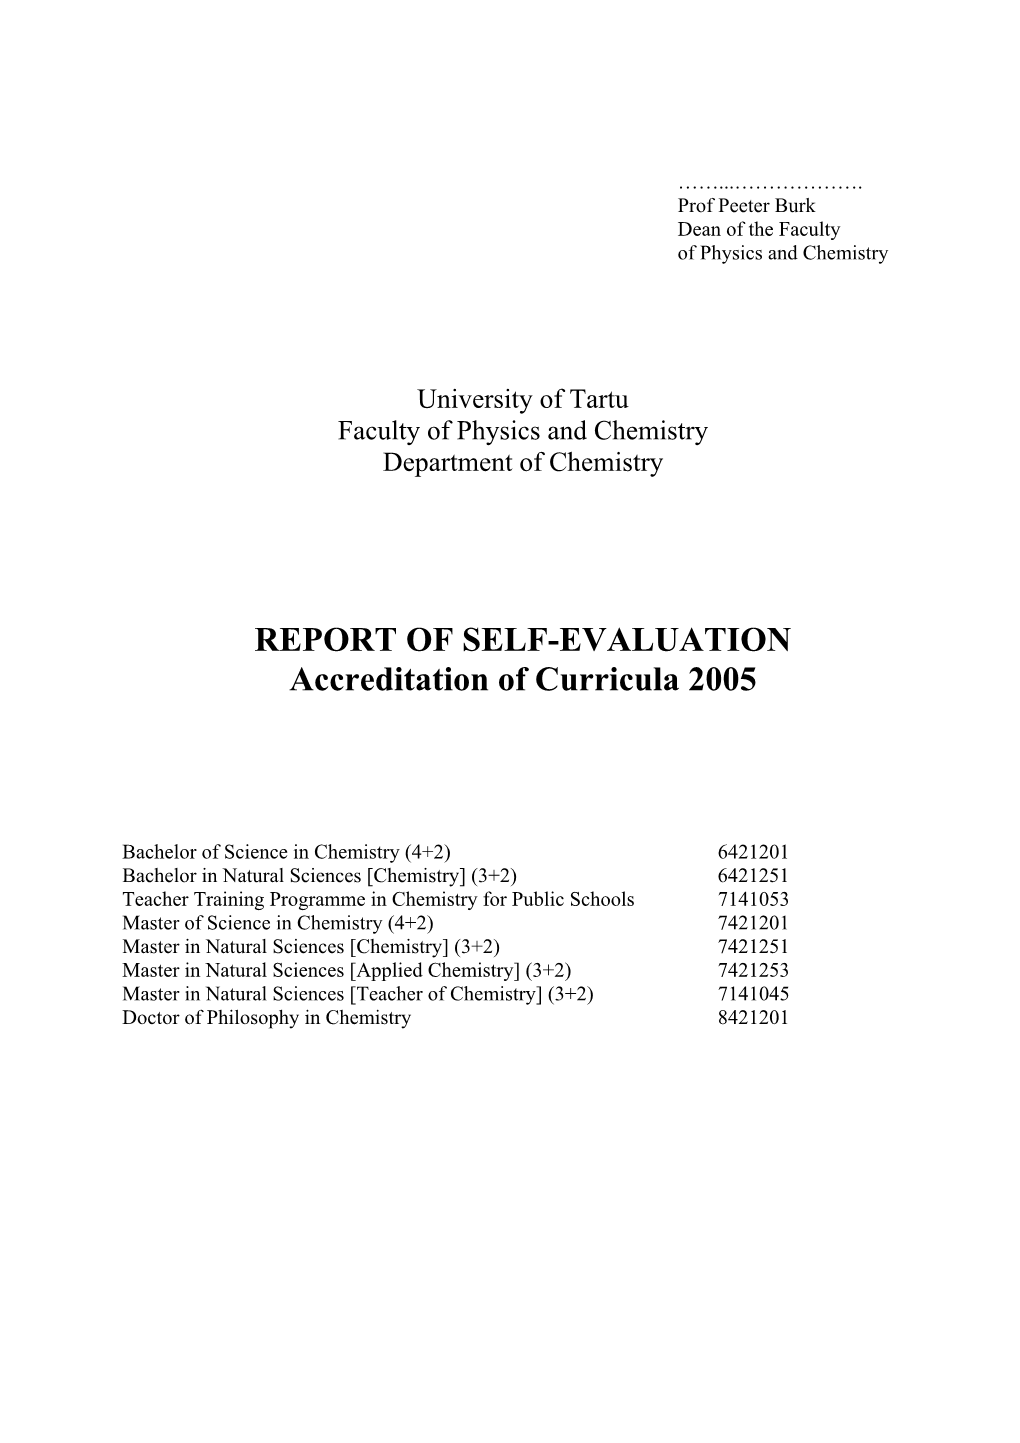 REPORT of SELF-EVALUATION Accreditation of Curricula 2005